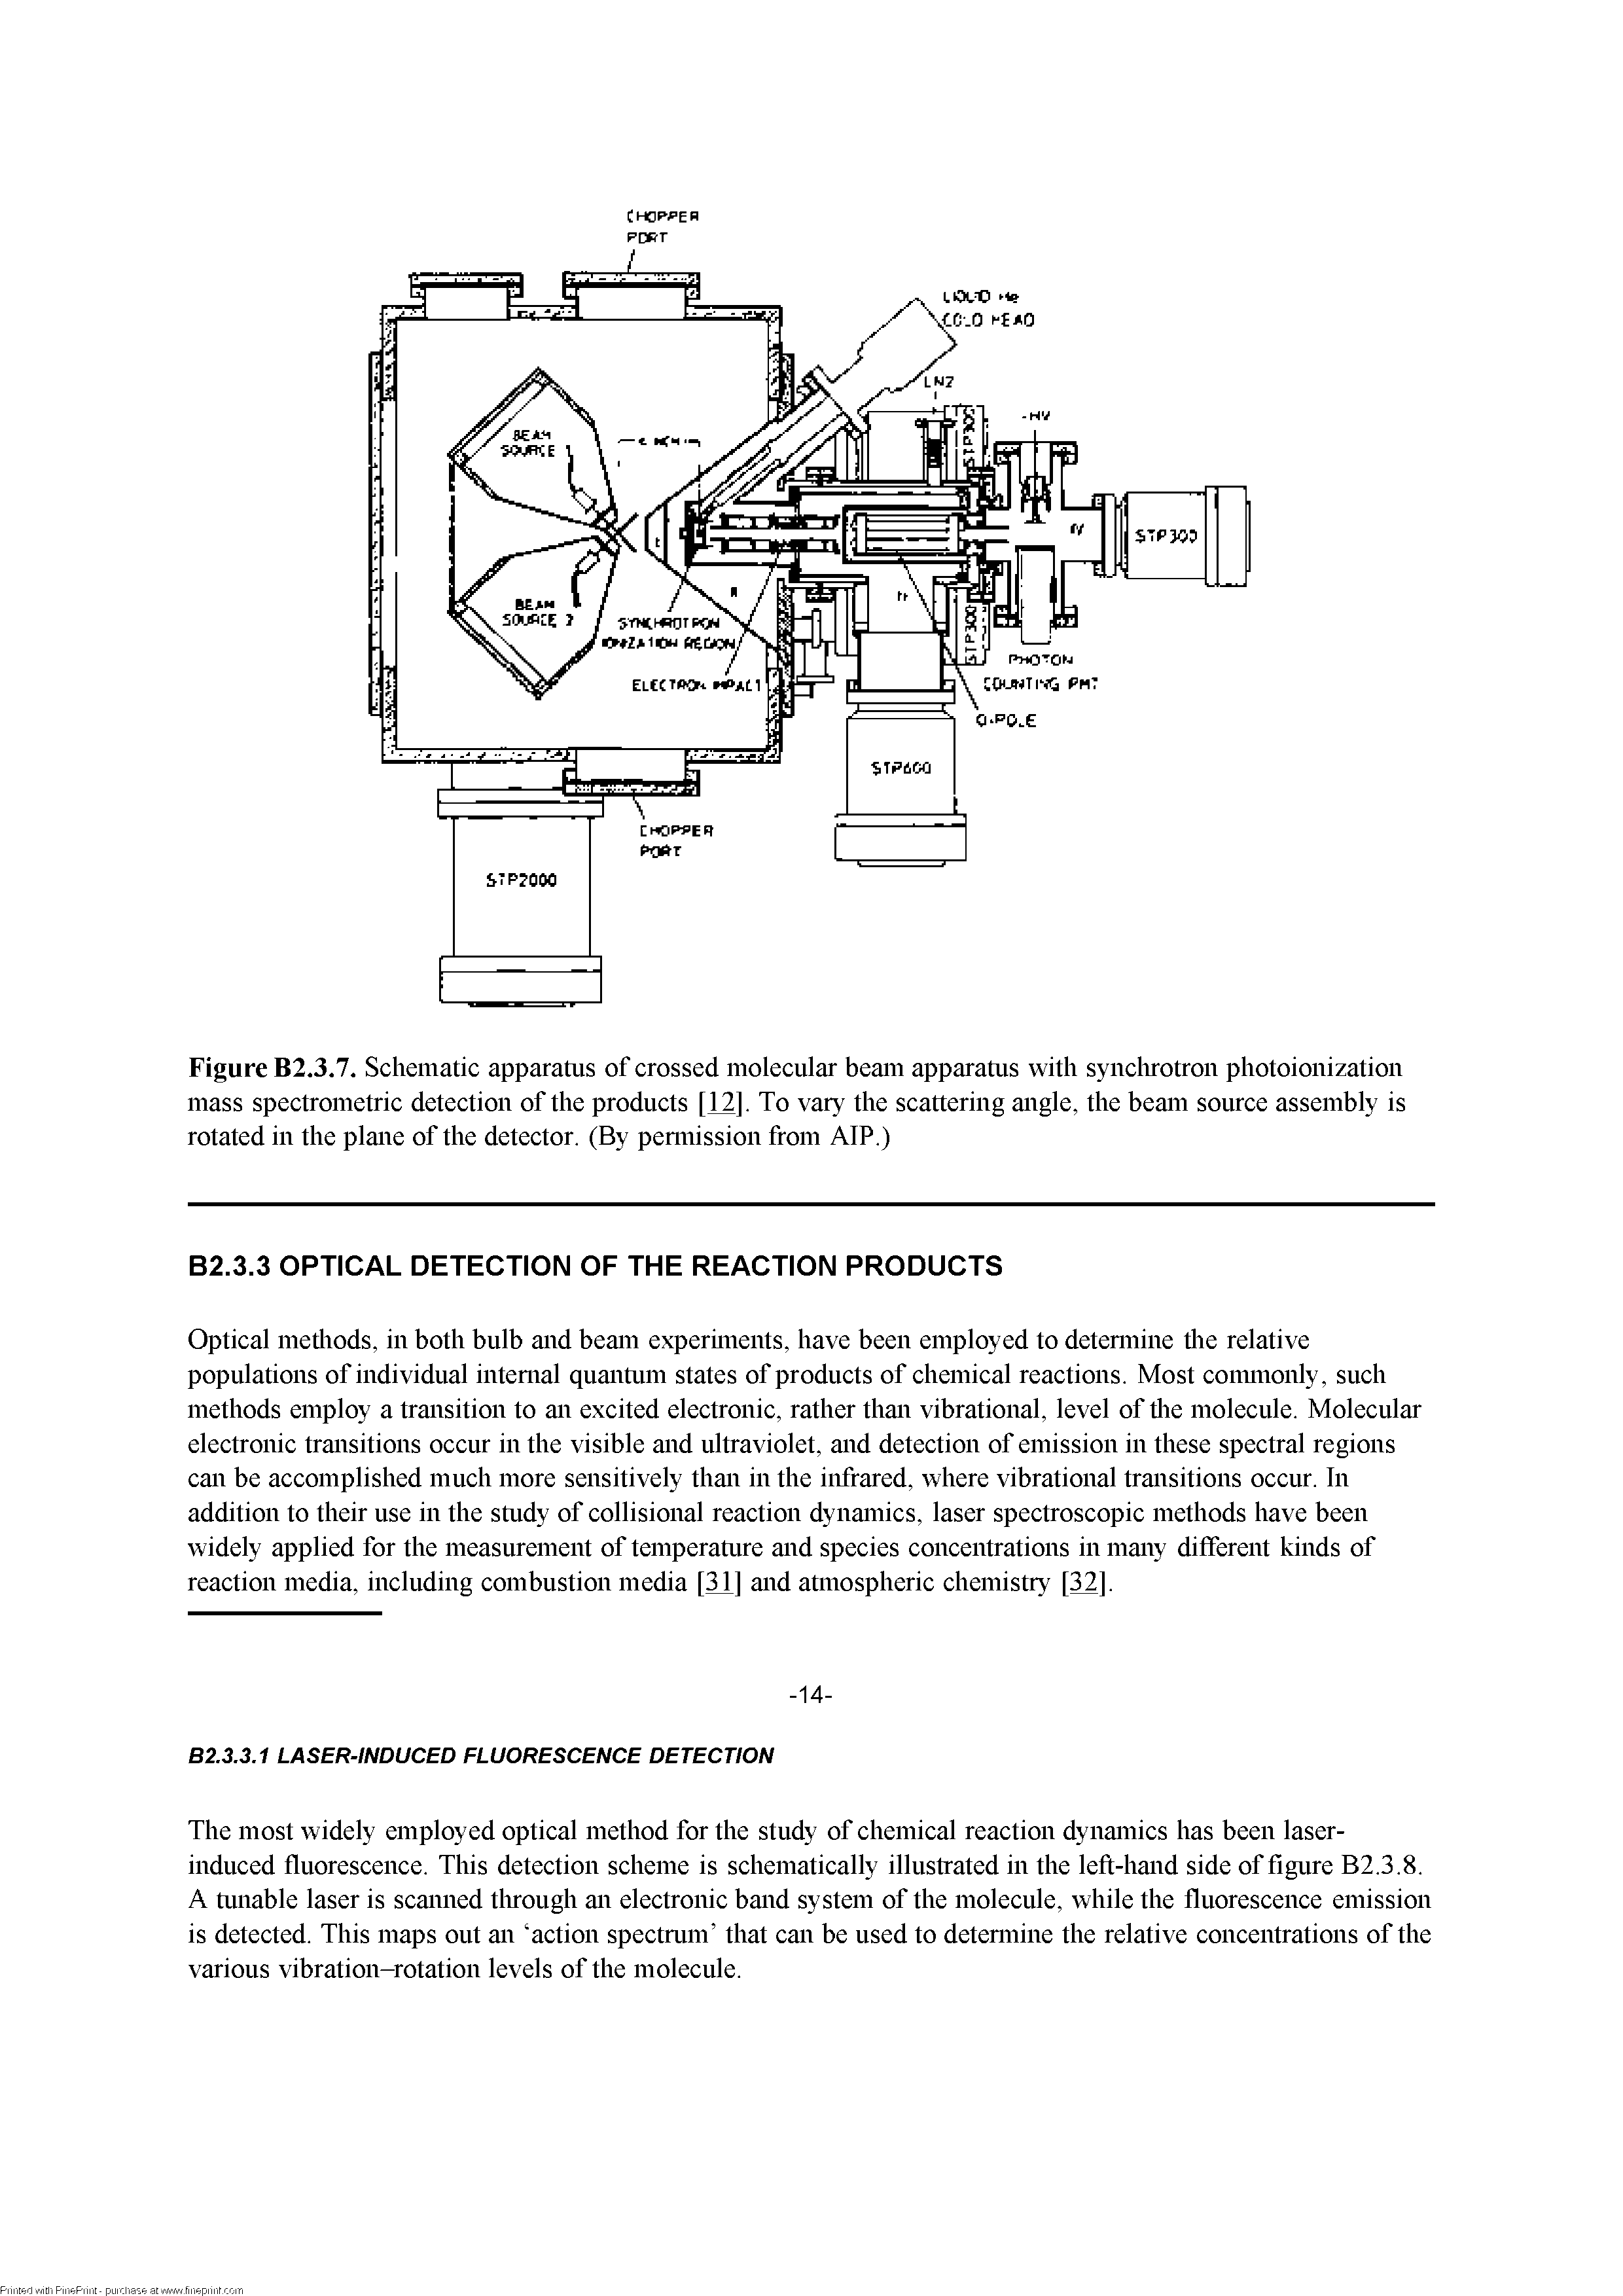 Figure B2.3.7. Schematic apparatus of crossed molecular beam apparatus with synclirotron photoionization mass spectrometric detection of the products [12], To vary the scattering angle, the beam source assembly is rotated in the plane of the detector. (By pemrission from AIP.)...